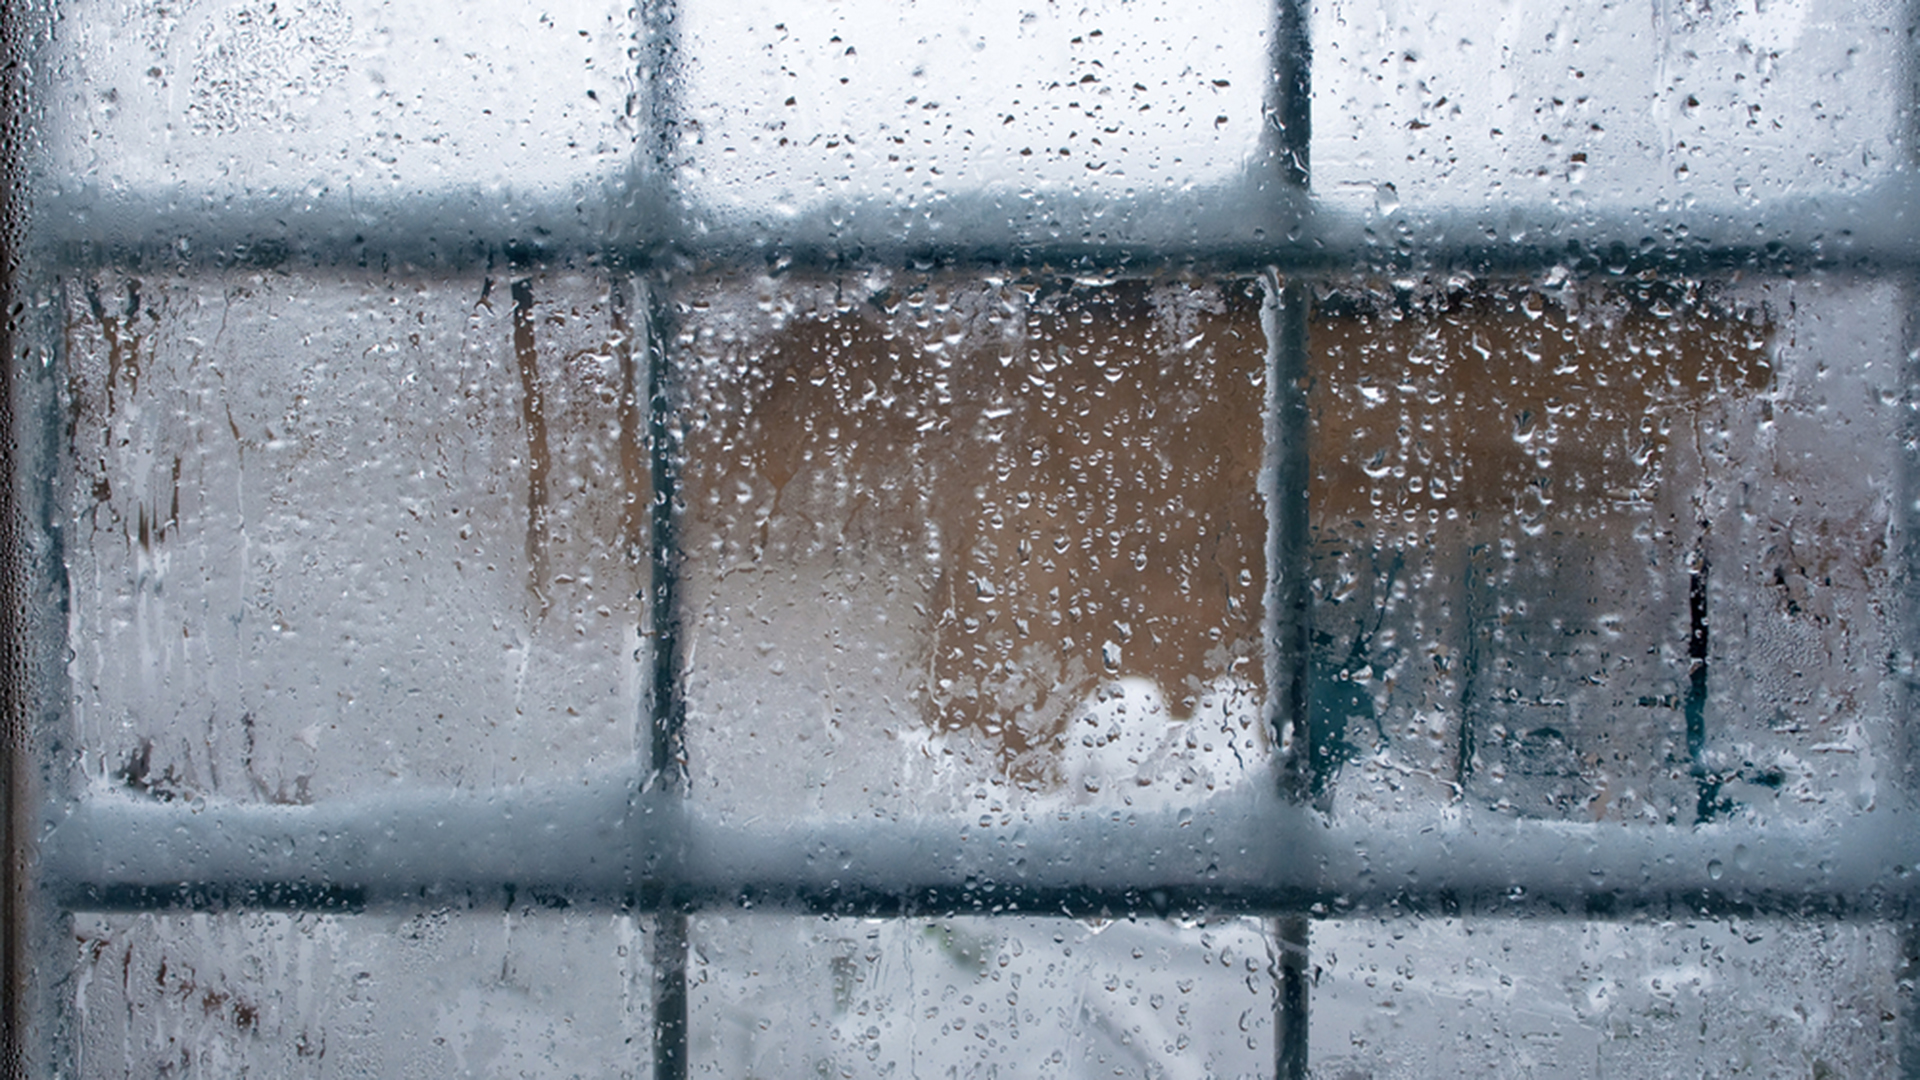 Winter window, drops of water and snowflakes on a window pane.; Shutterstock ID 122111422; PO: david-today